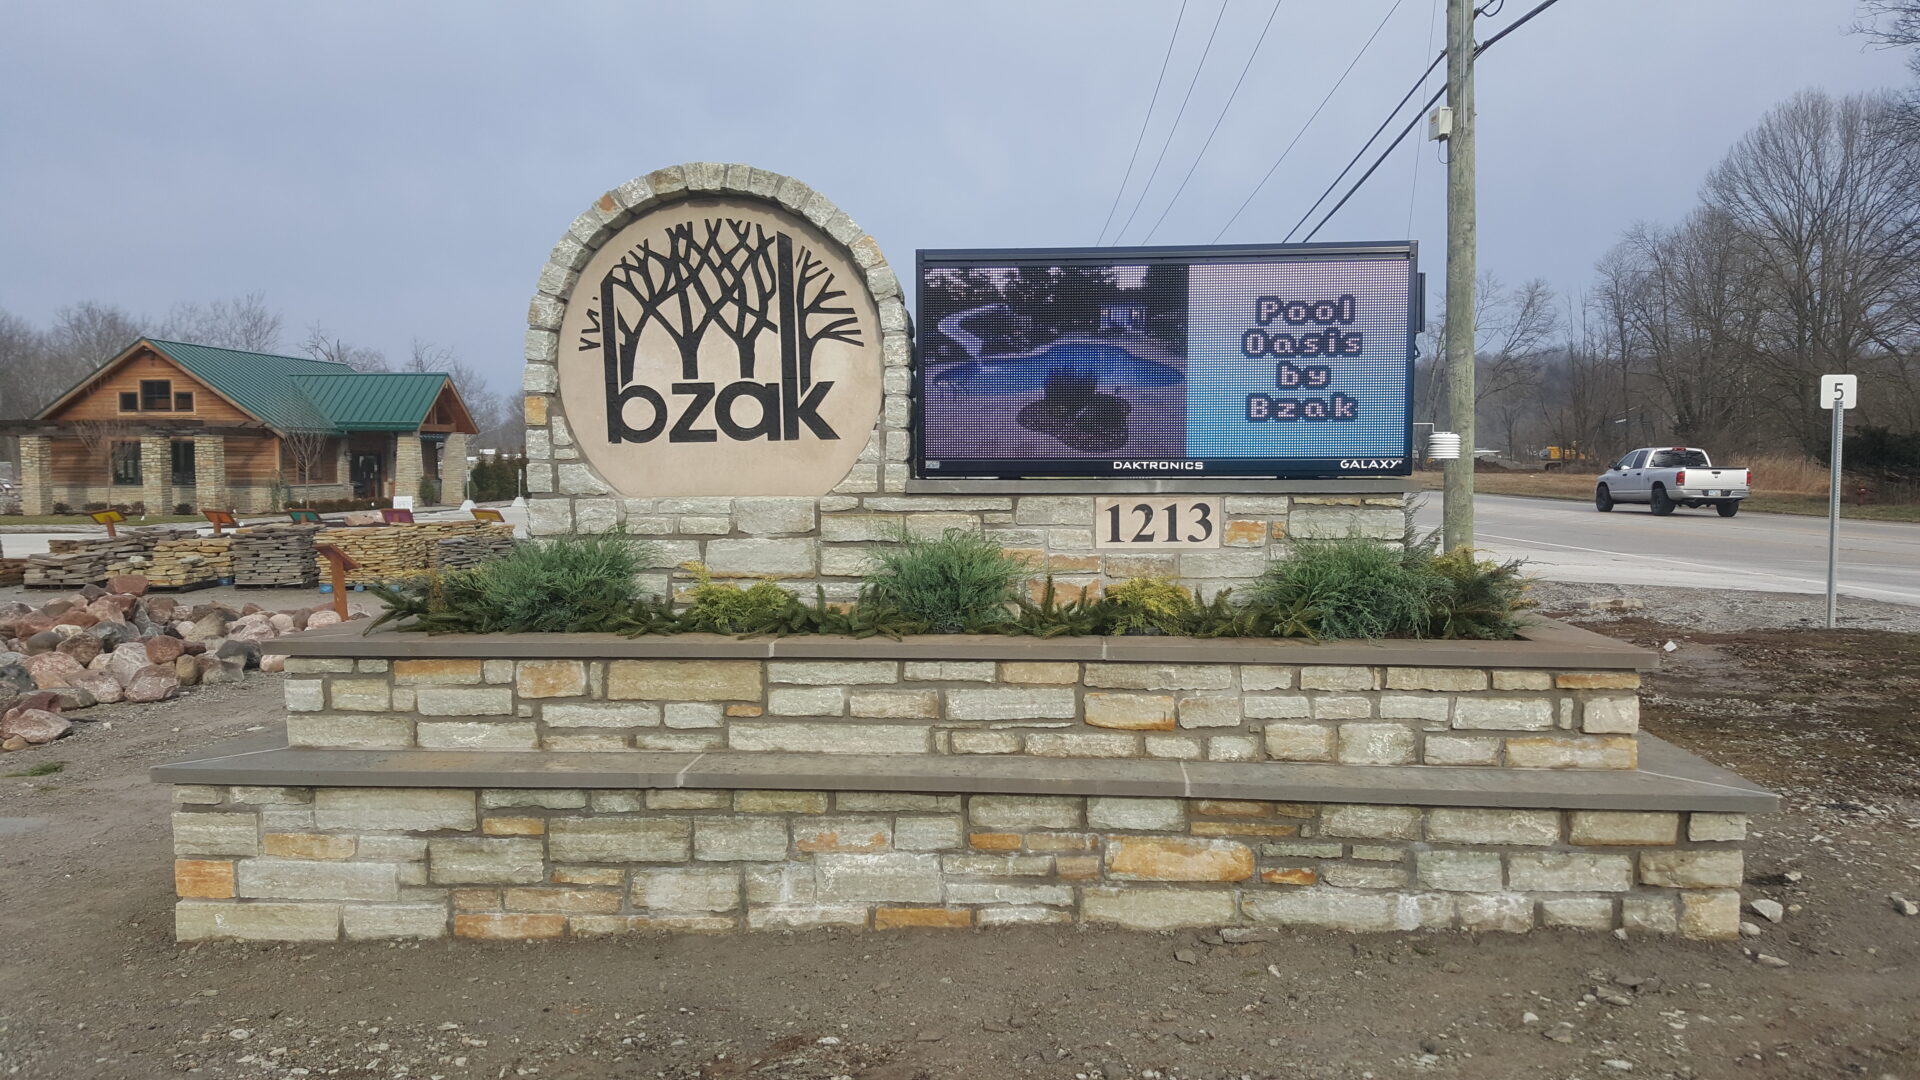 LED Message Board within a rock fabricated sign